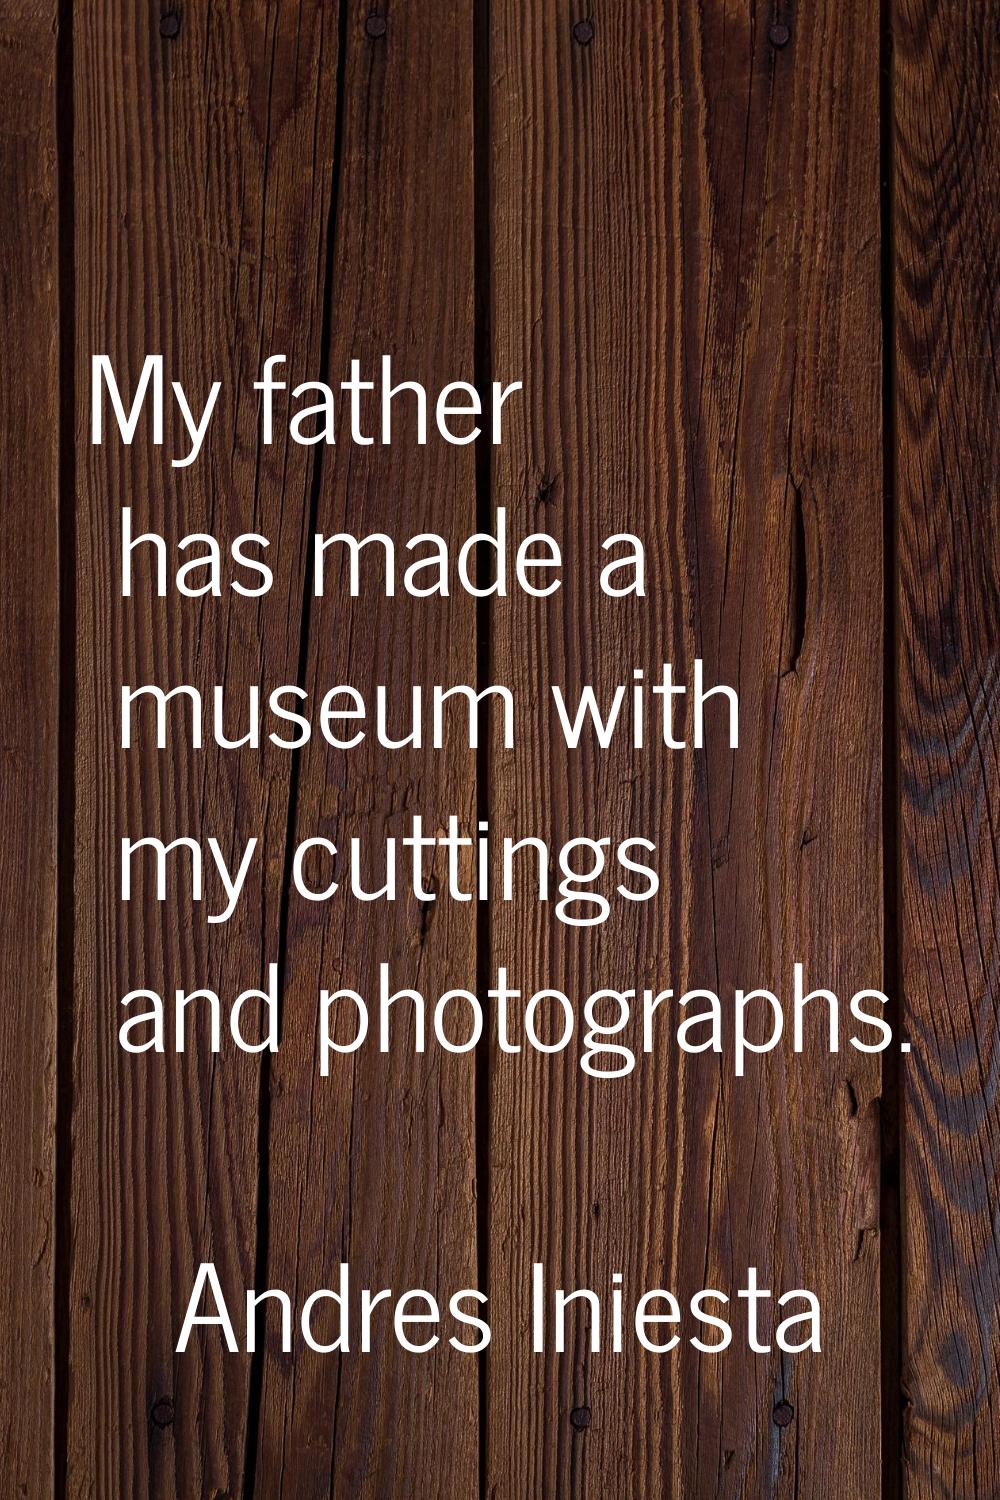 My father has made a museum with my cuttings and photographs.